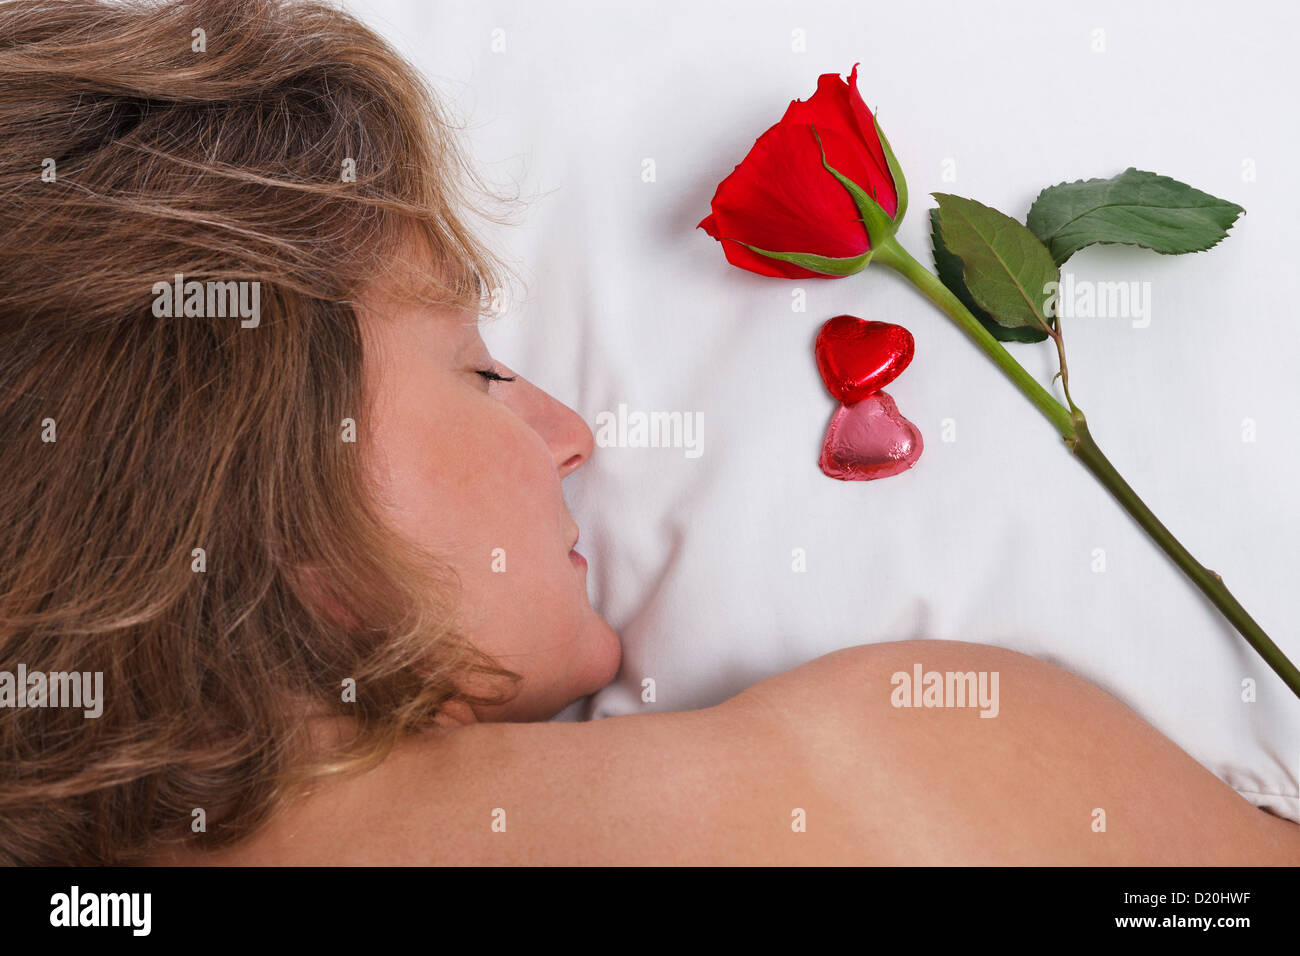 A woman is sleeping whilst a single red rose and heart shaped chocolates have been left on her pillow for Valentines day. Stock Photo